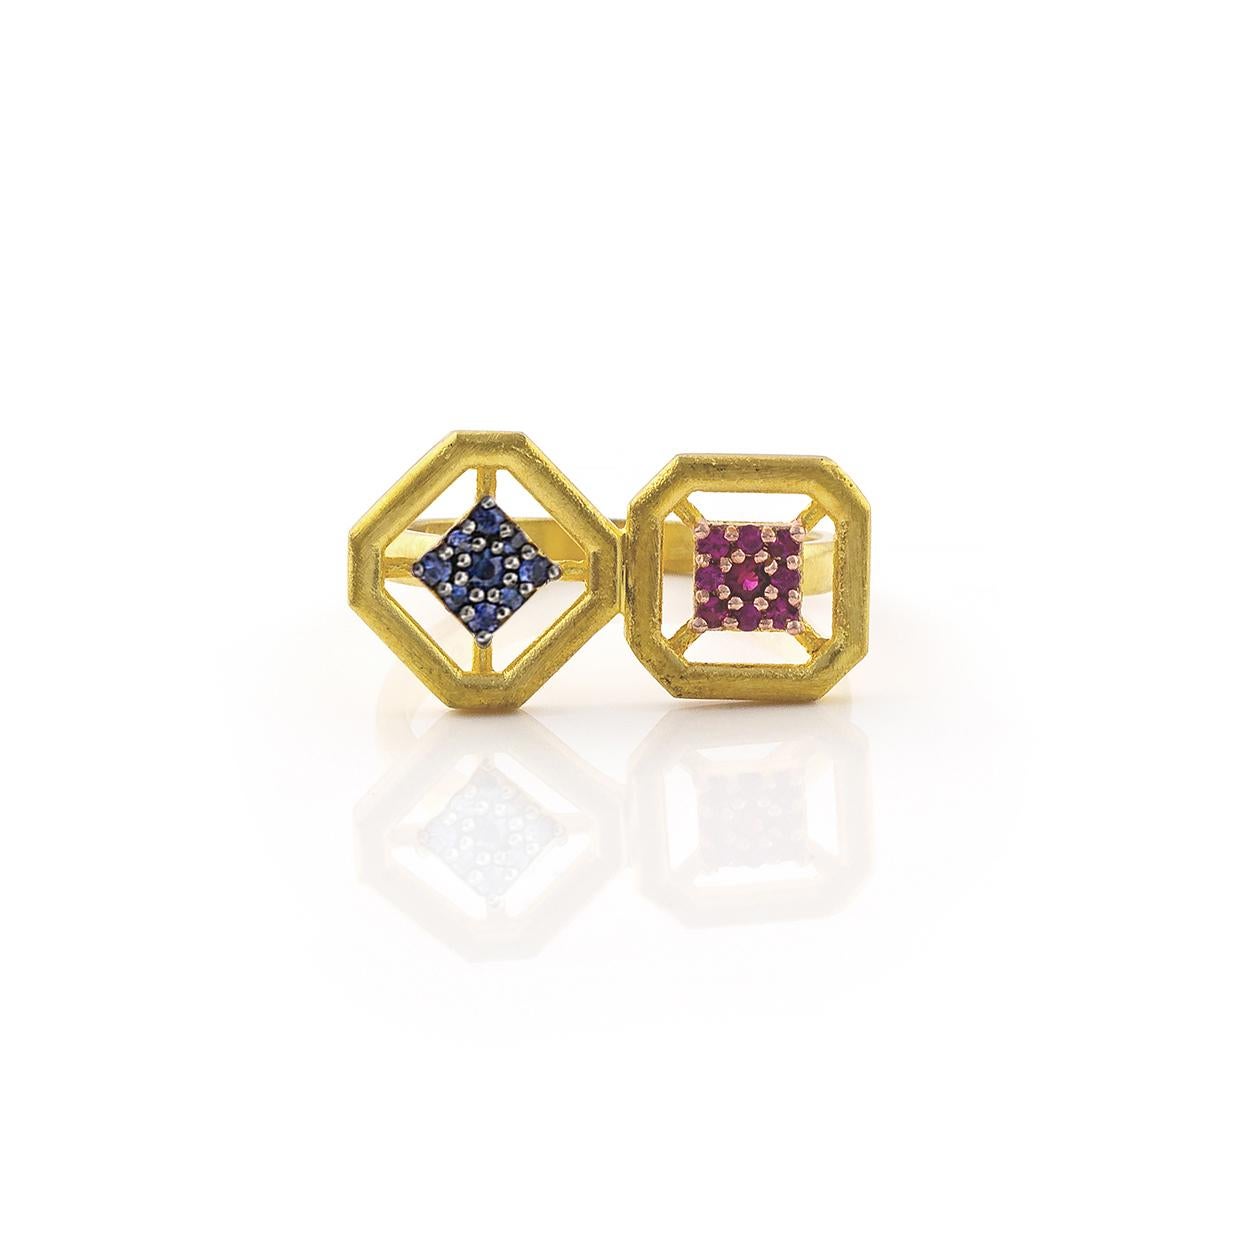 100% recycled 14K Yellow Gold, plated with 22K Gold

Ruby

Blue Sapphire

Size: on order

Ancient Gold Jewelry collection inspired by the antiquity, for young women and men, called Apollonian.

Apollonian is

The beauty of youth
The antiquity
The